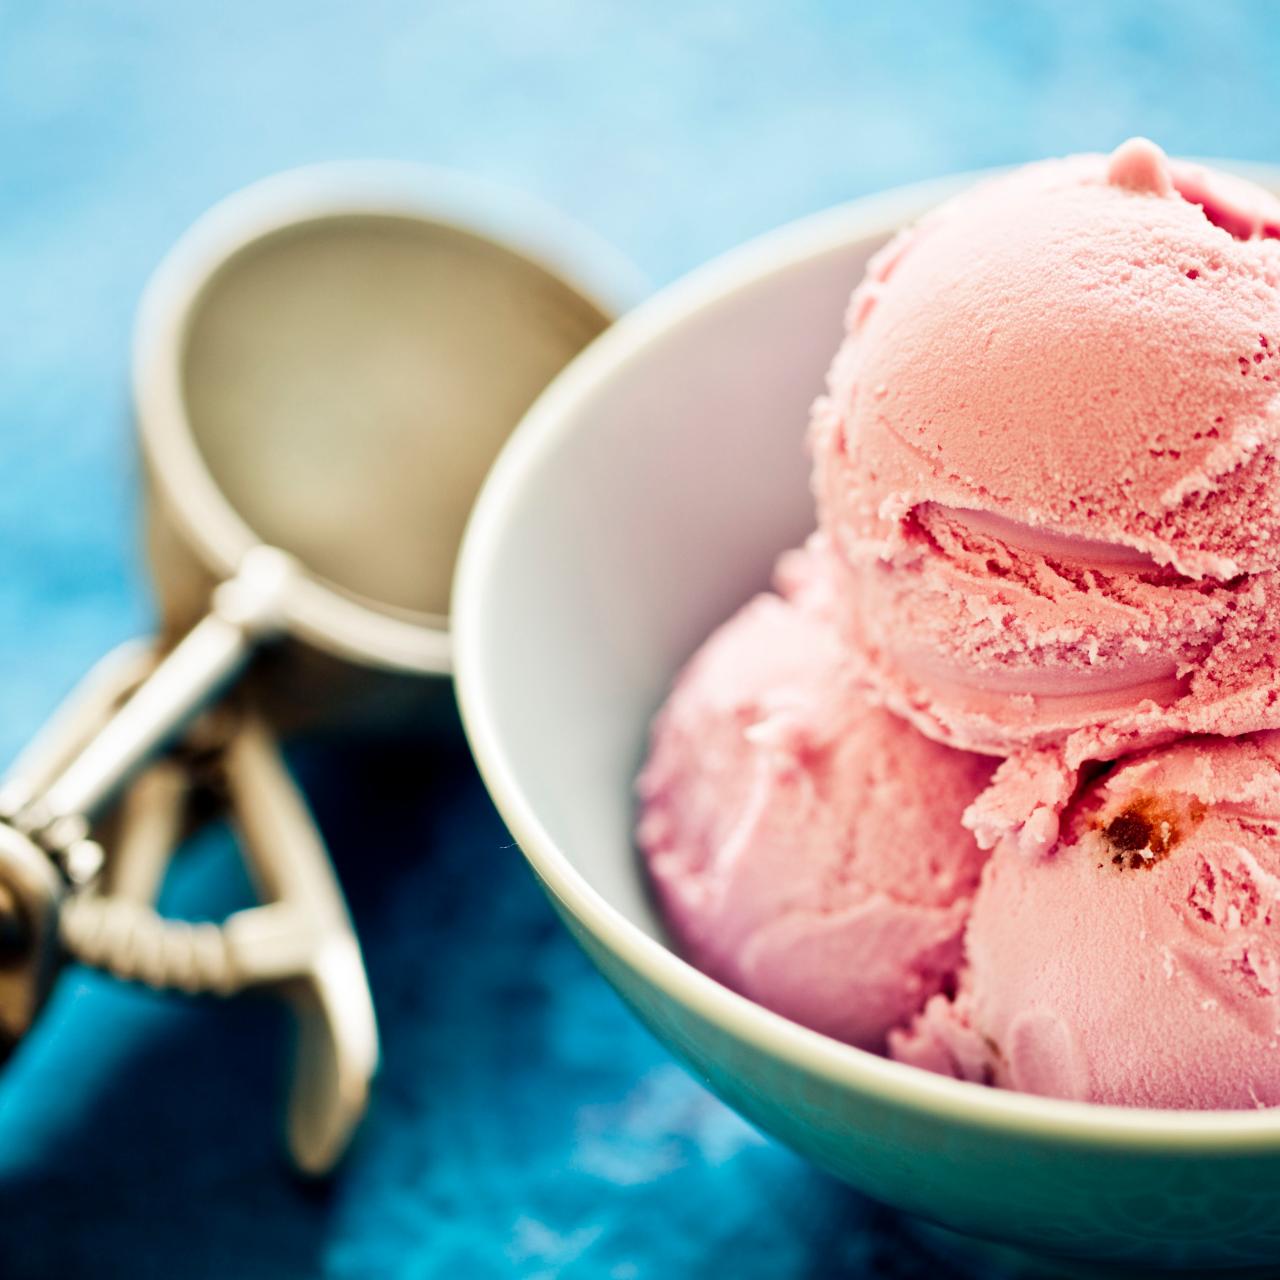 The 8 Best Ice Cream Makers of 2023, Tested & Reviewed